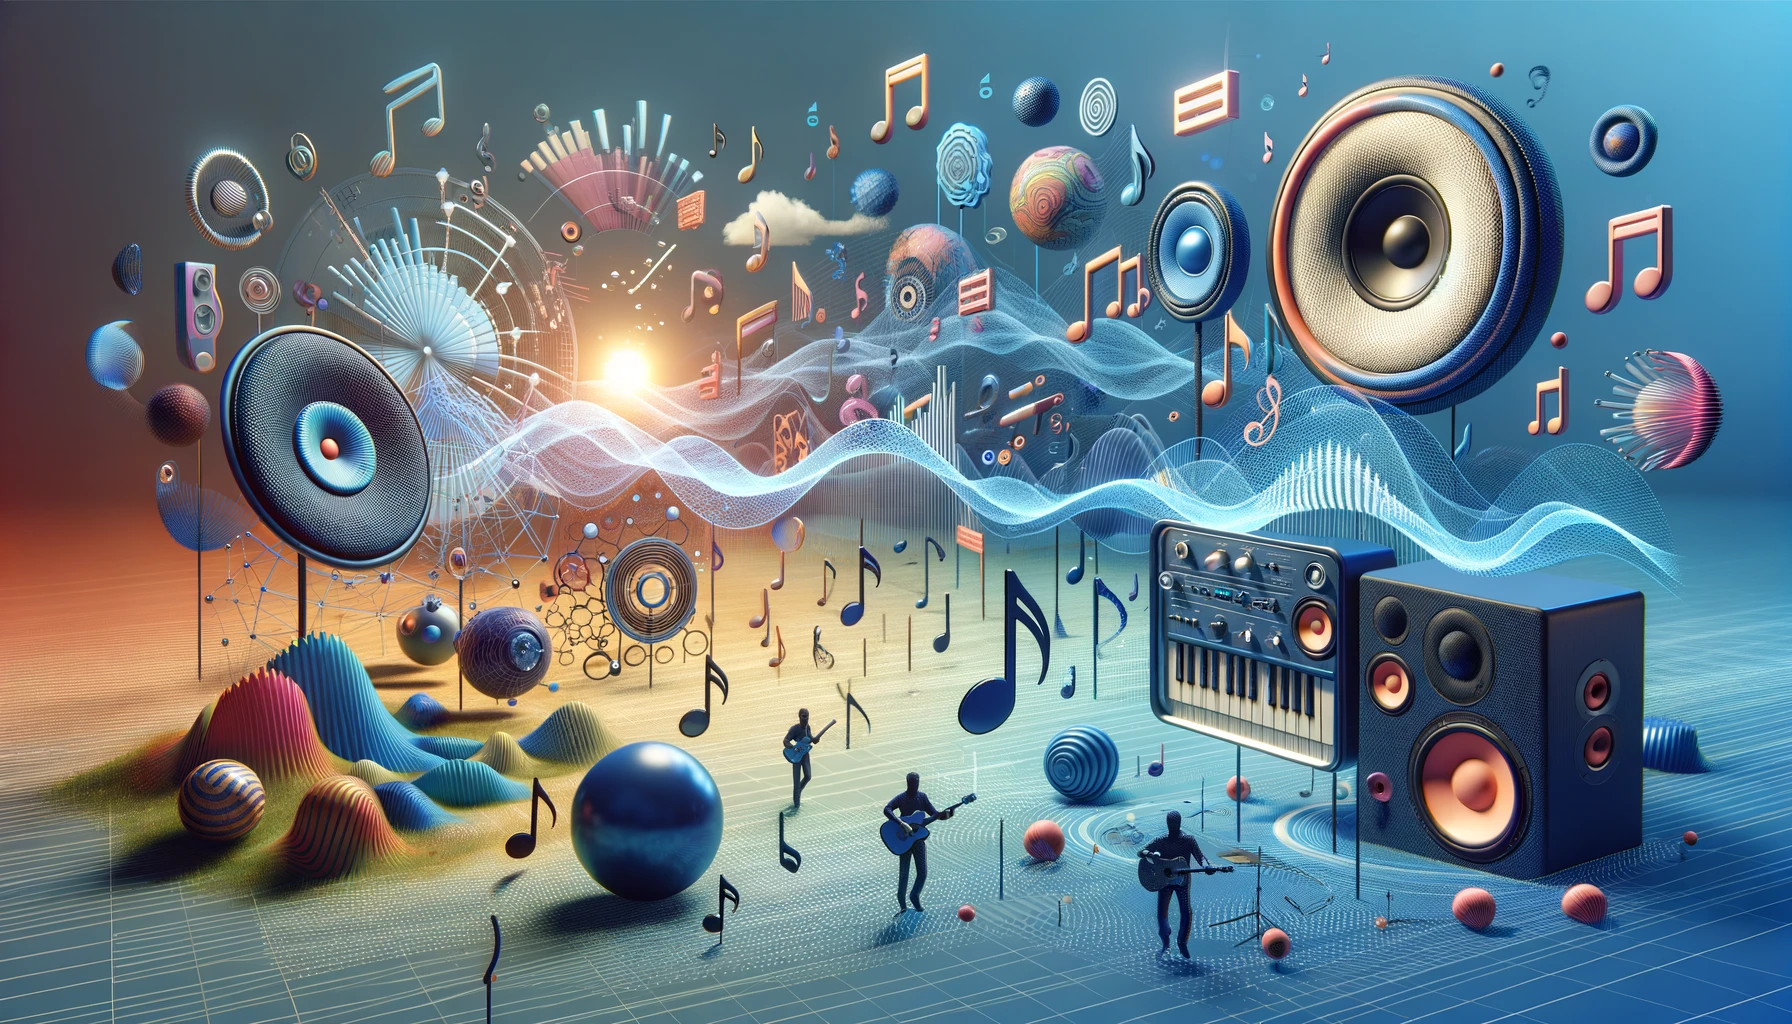 A 3D landscape enriched with sound waves, musical notes, and audio icons, depicting characters interacting within a sonically enhanced environment, highlighting the seamless integration of sound in immersive design.